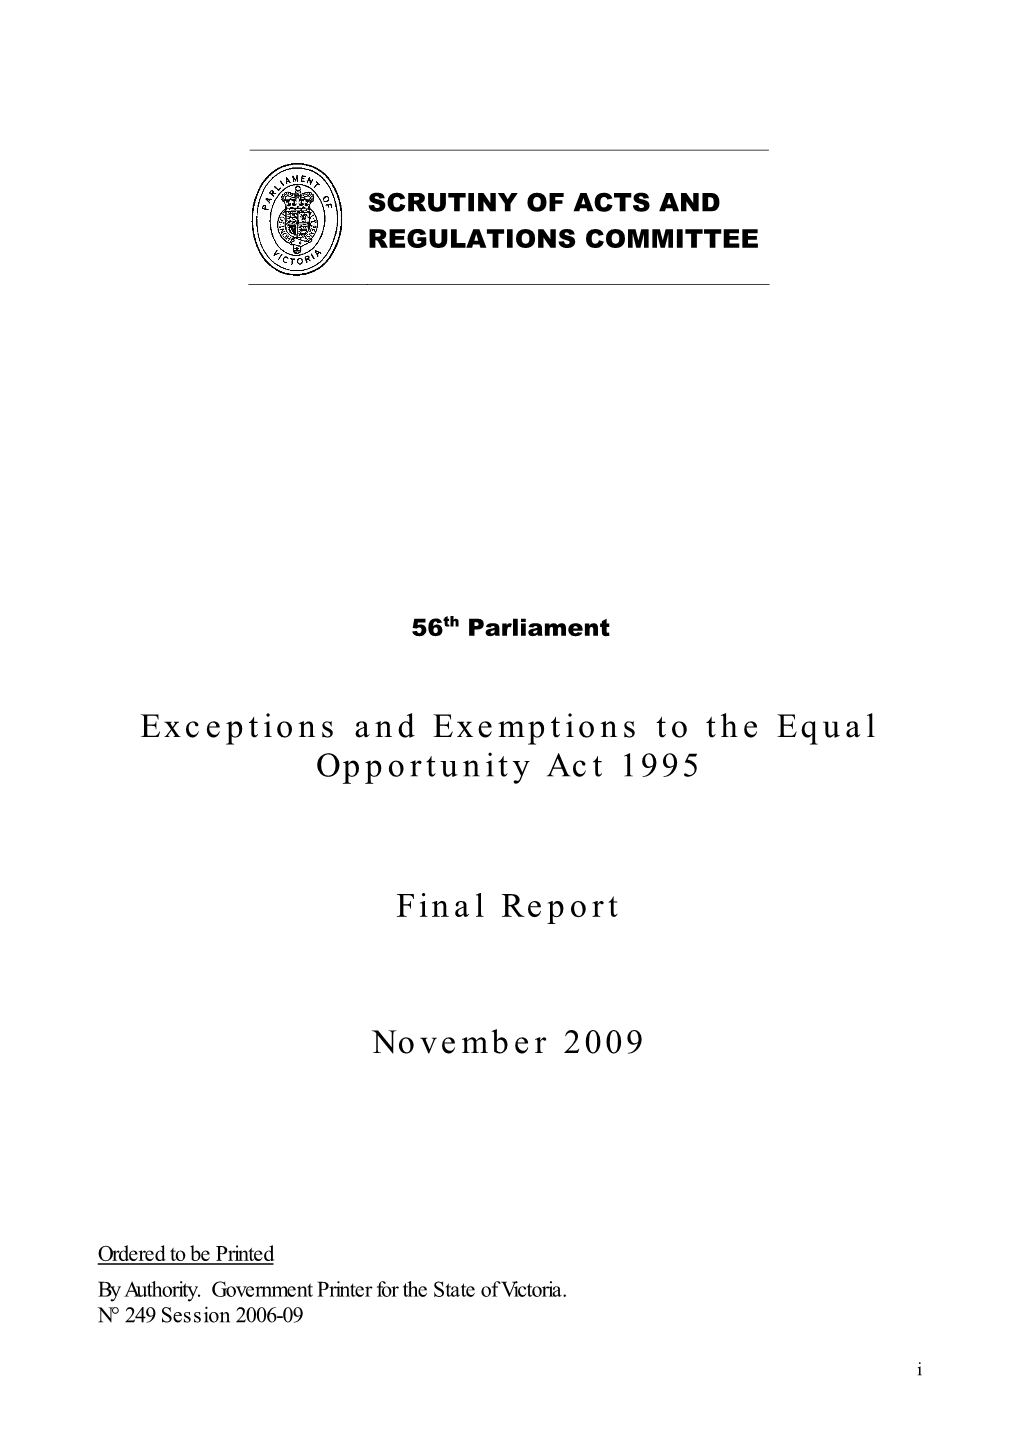 Exceptions and Exemptions to the Equal Opportunity Act 1995, Final Report ISBN 978 0 7311 3081 2 Ii